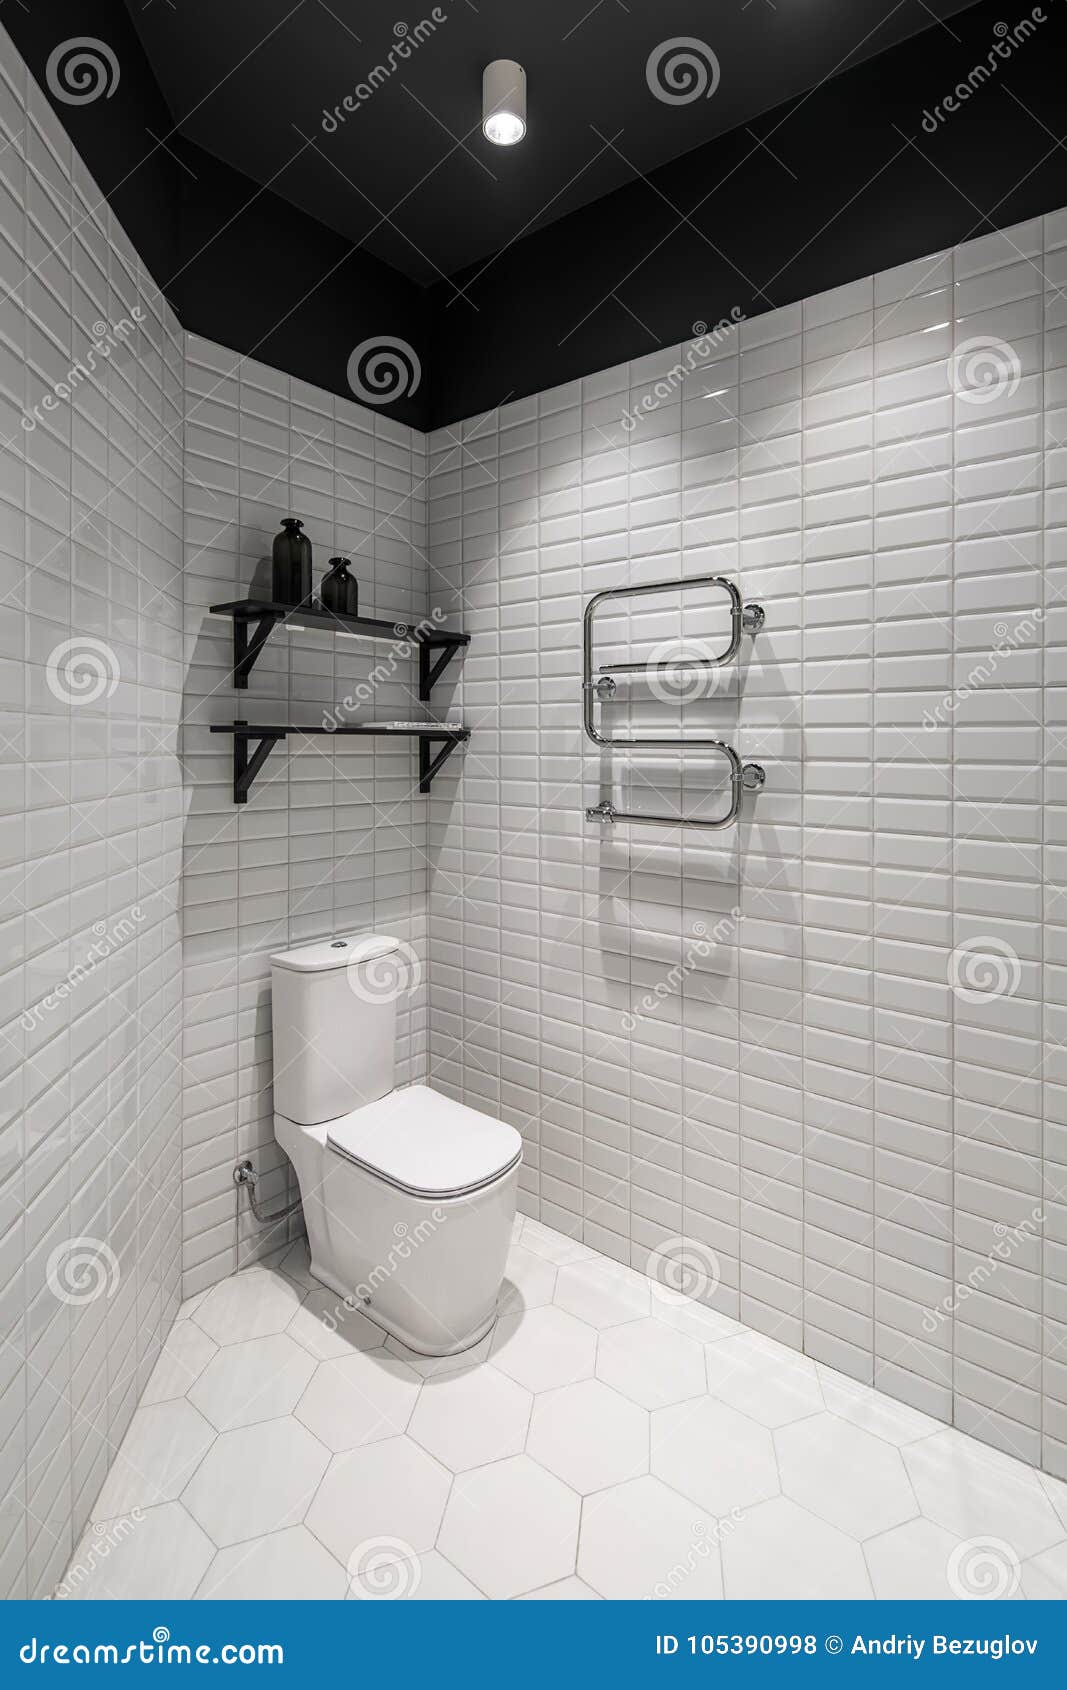 Lavatory in style stock photo. Image of lamp - 105390998